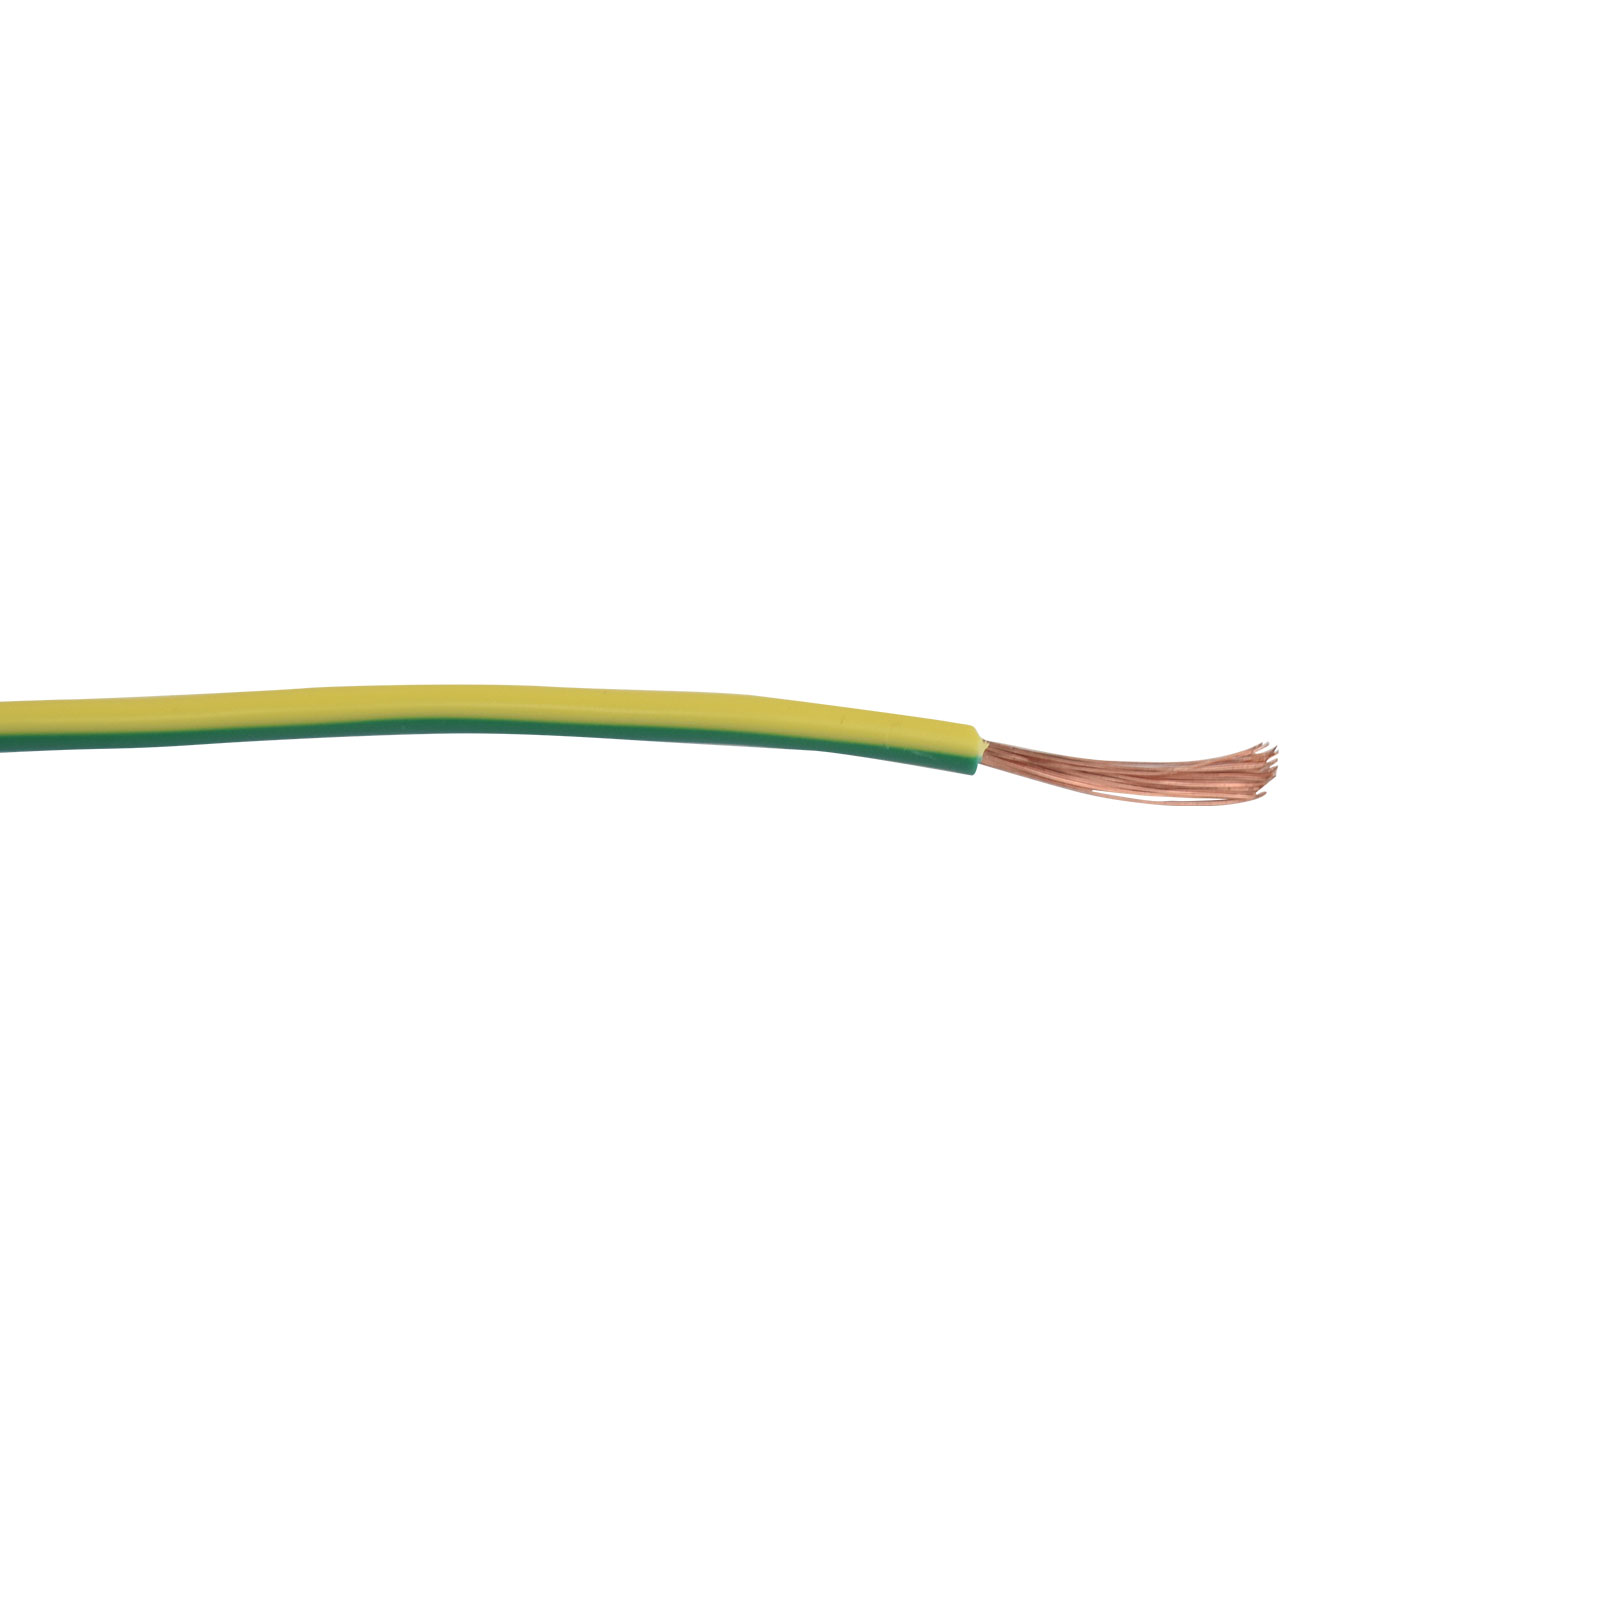 16AWG 1.5mm² PVC Insulated Copper Stranded Wire - Yellow / Green